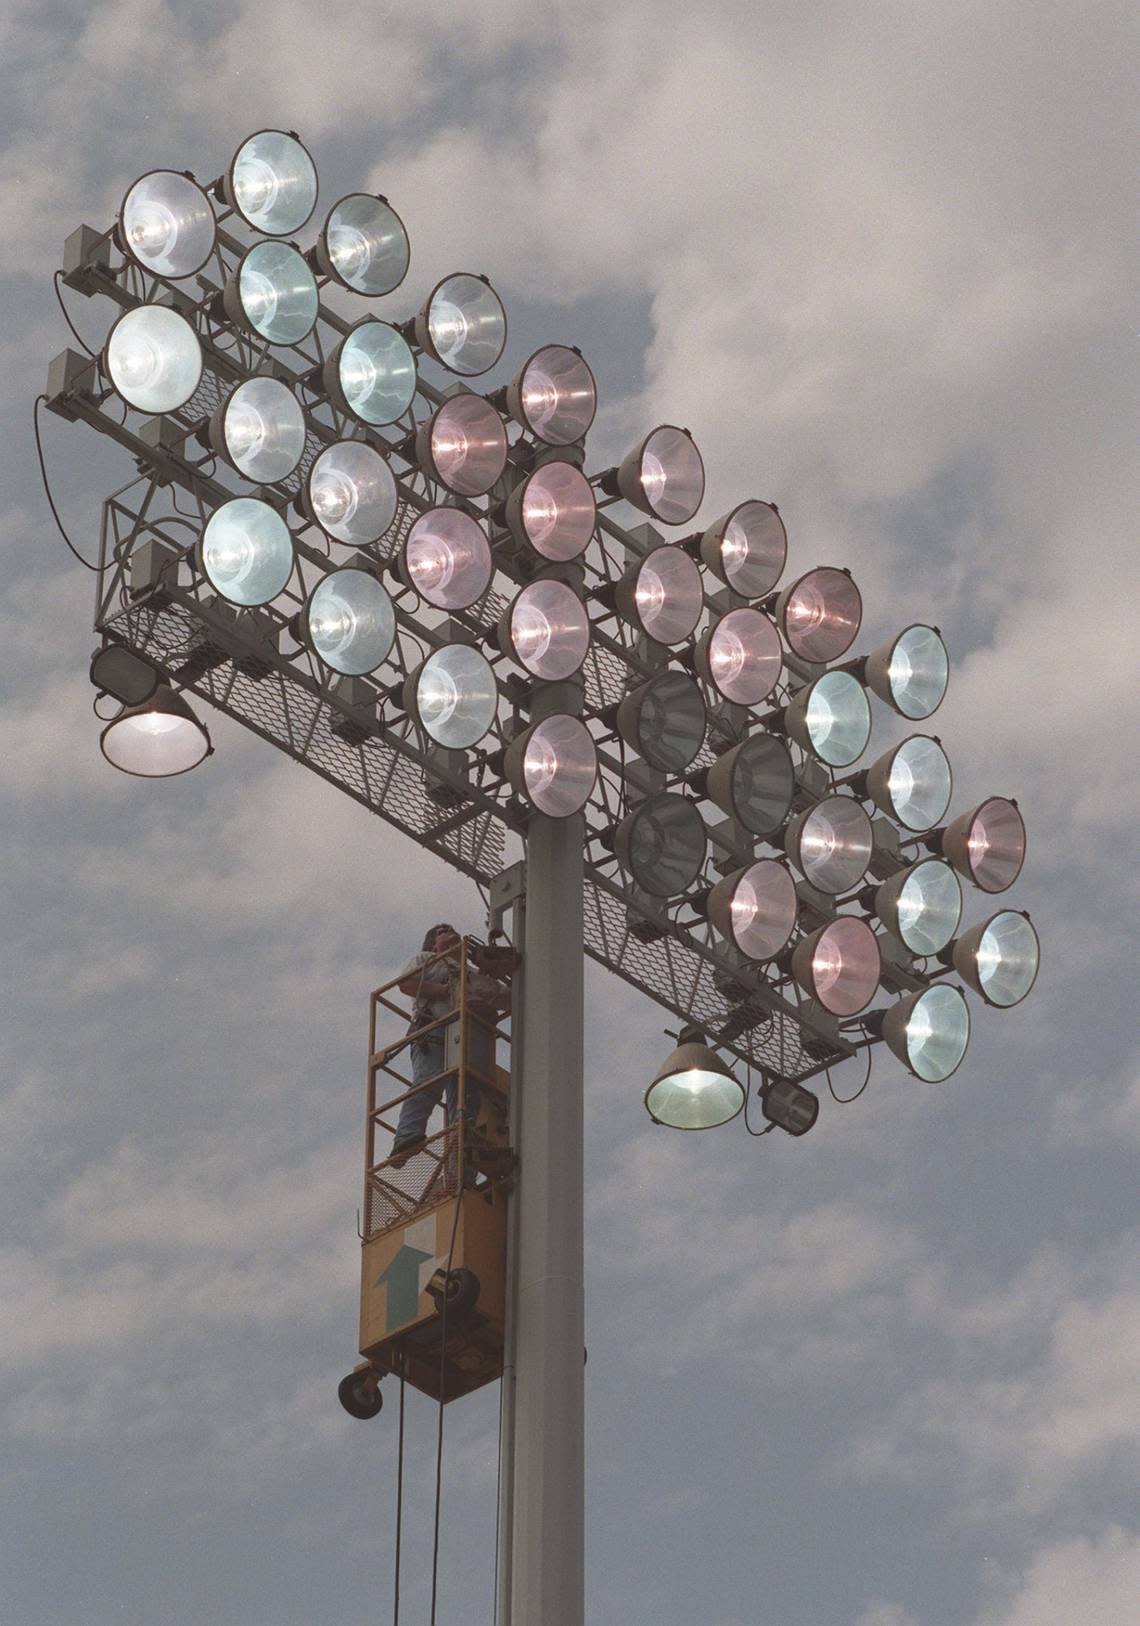 The installation of stadium lights was done to boost attendance and provide players relief from the heat of the daytime early in football seasons. CHARLES BERTRAM/Herald-Leader file photo